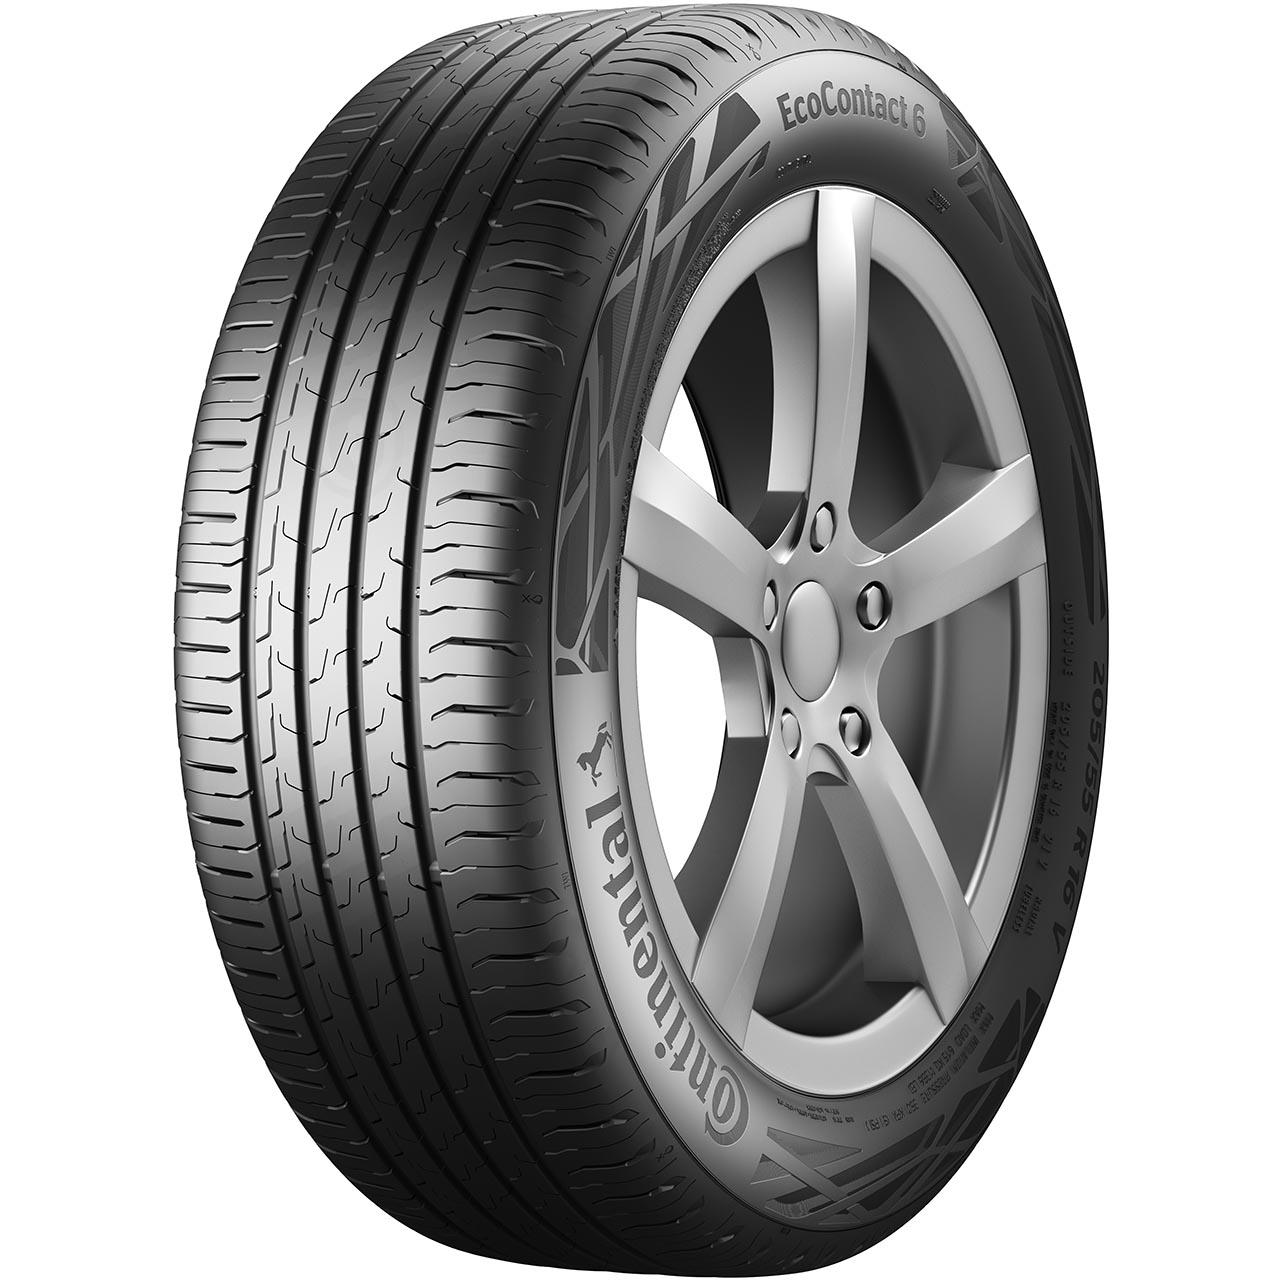 CONTINENTAL ECOCONTACT 6 185/65R14 86H